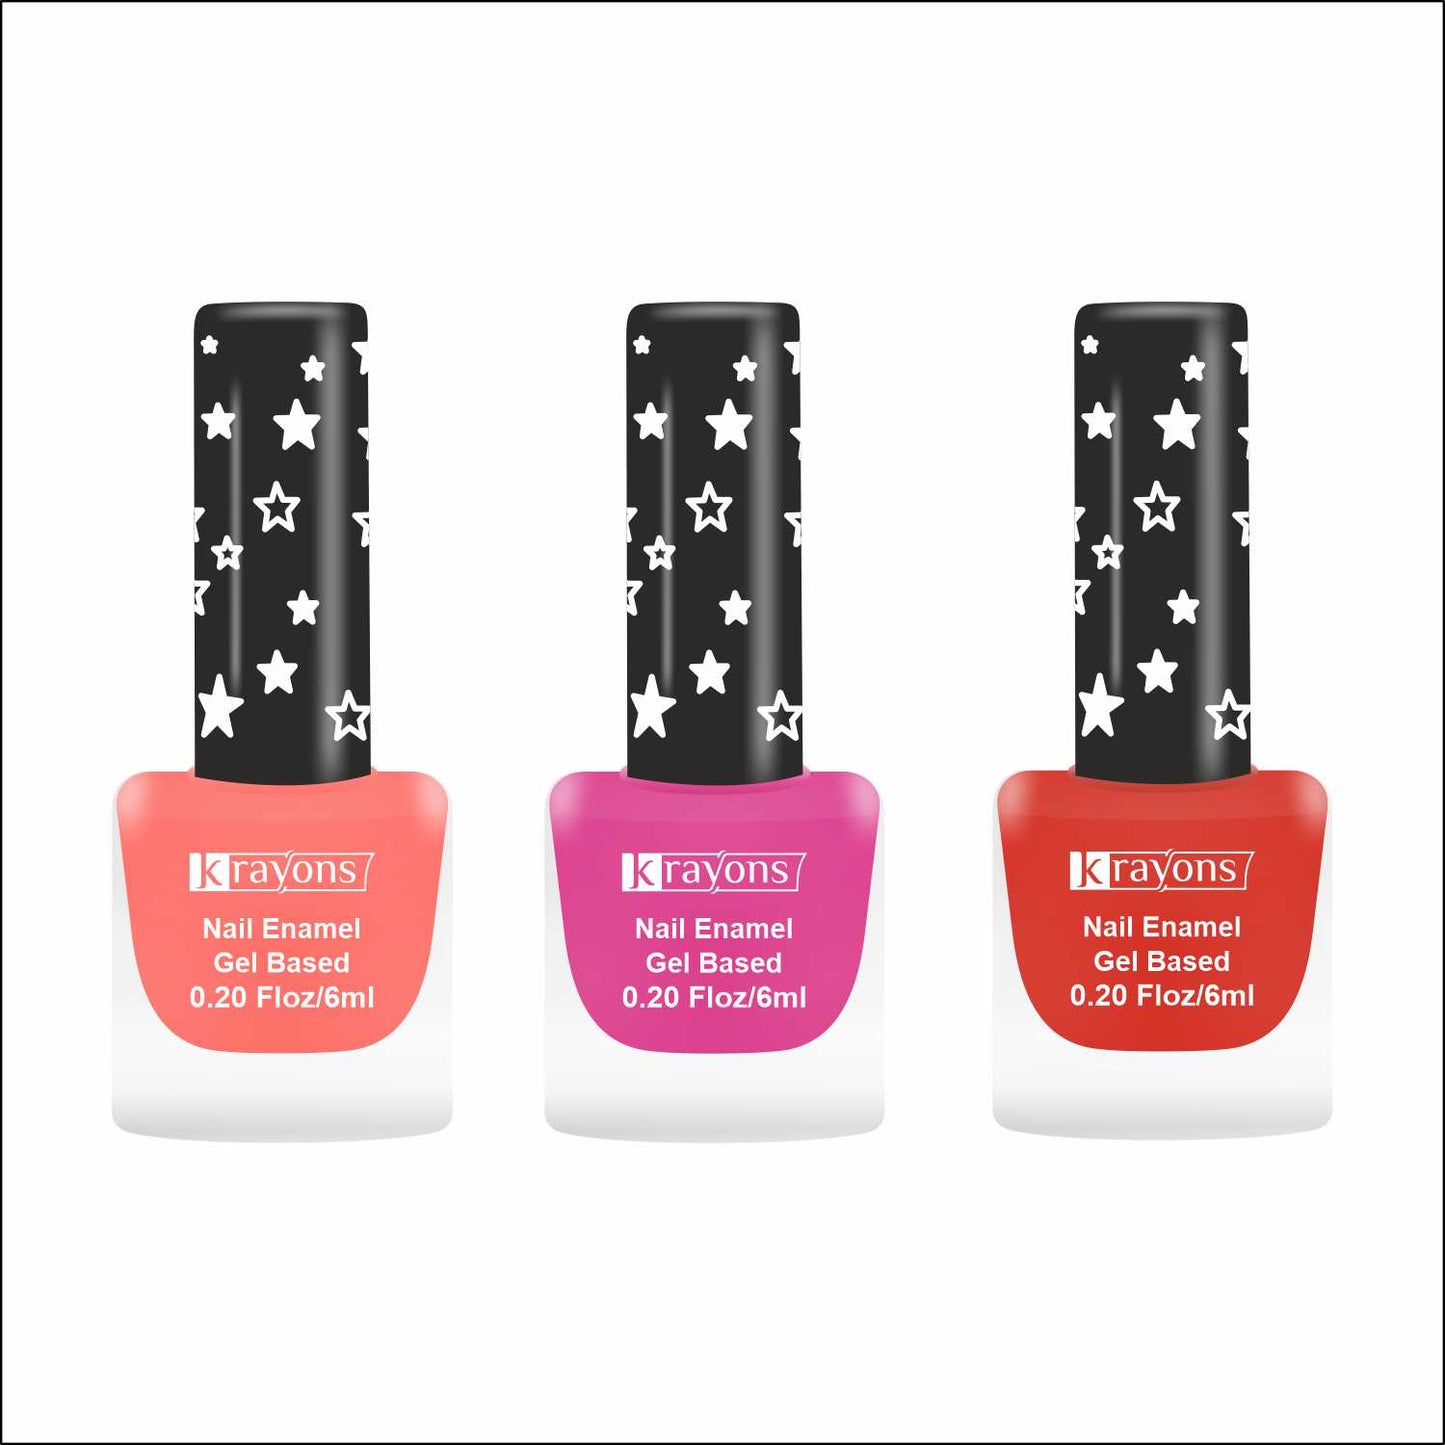 Krayons Cute Super Matte Finish Nail Enamel, Quick Dry, LongLasting, Blossom Peach, Hot Pink, Ruby Red, 6ml Each (Pack of 3)